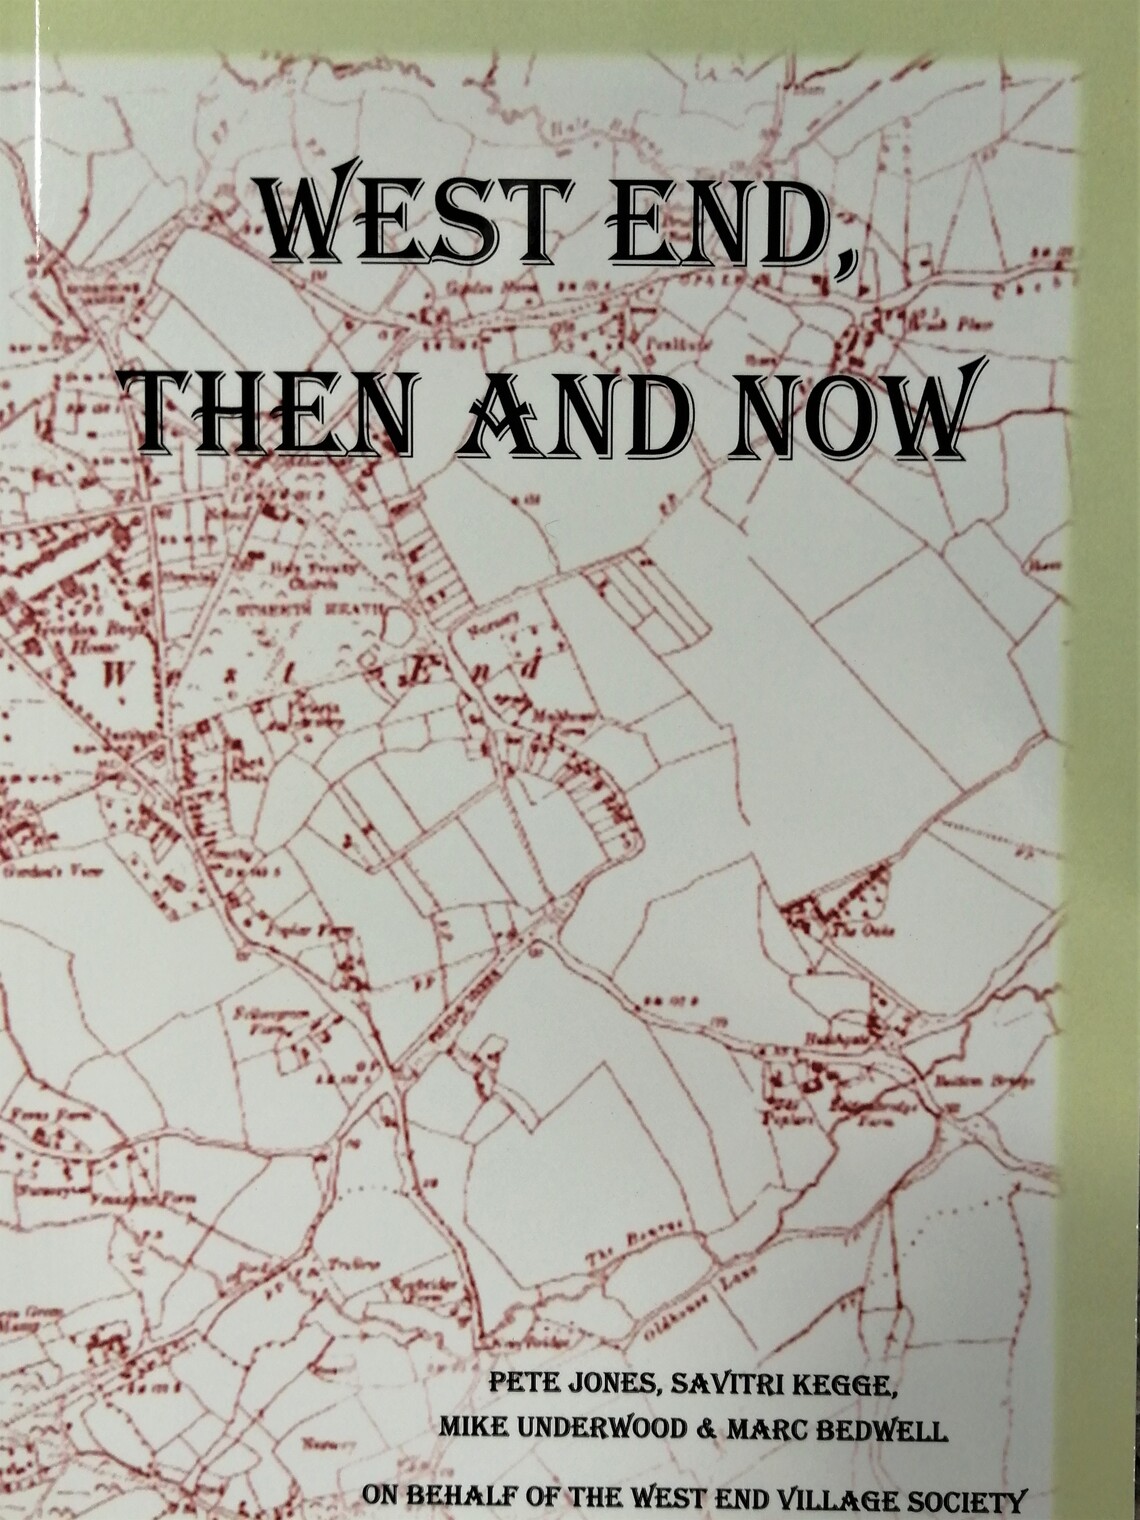 WEST END THEN AND NOW